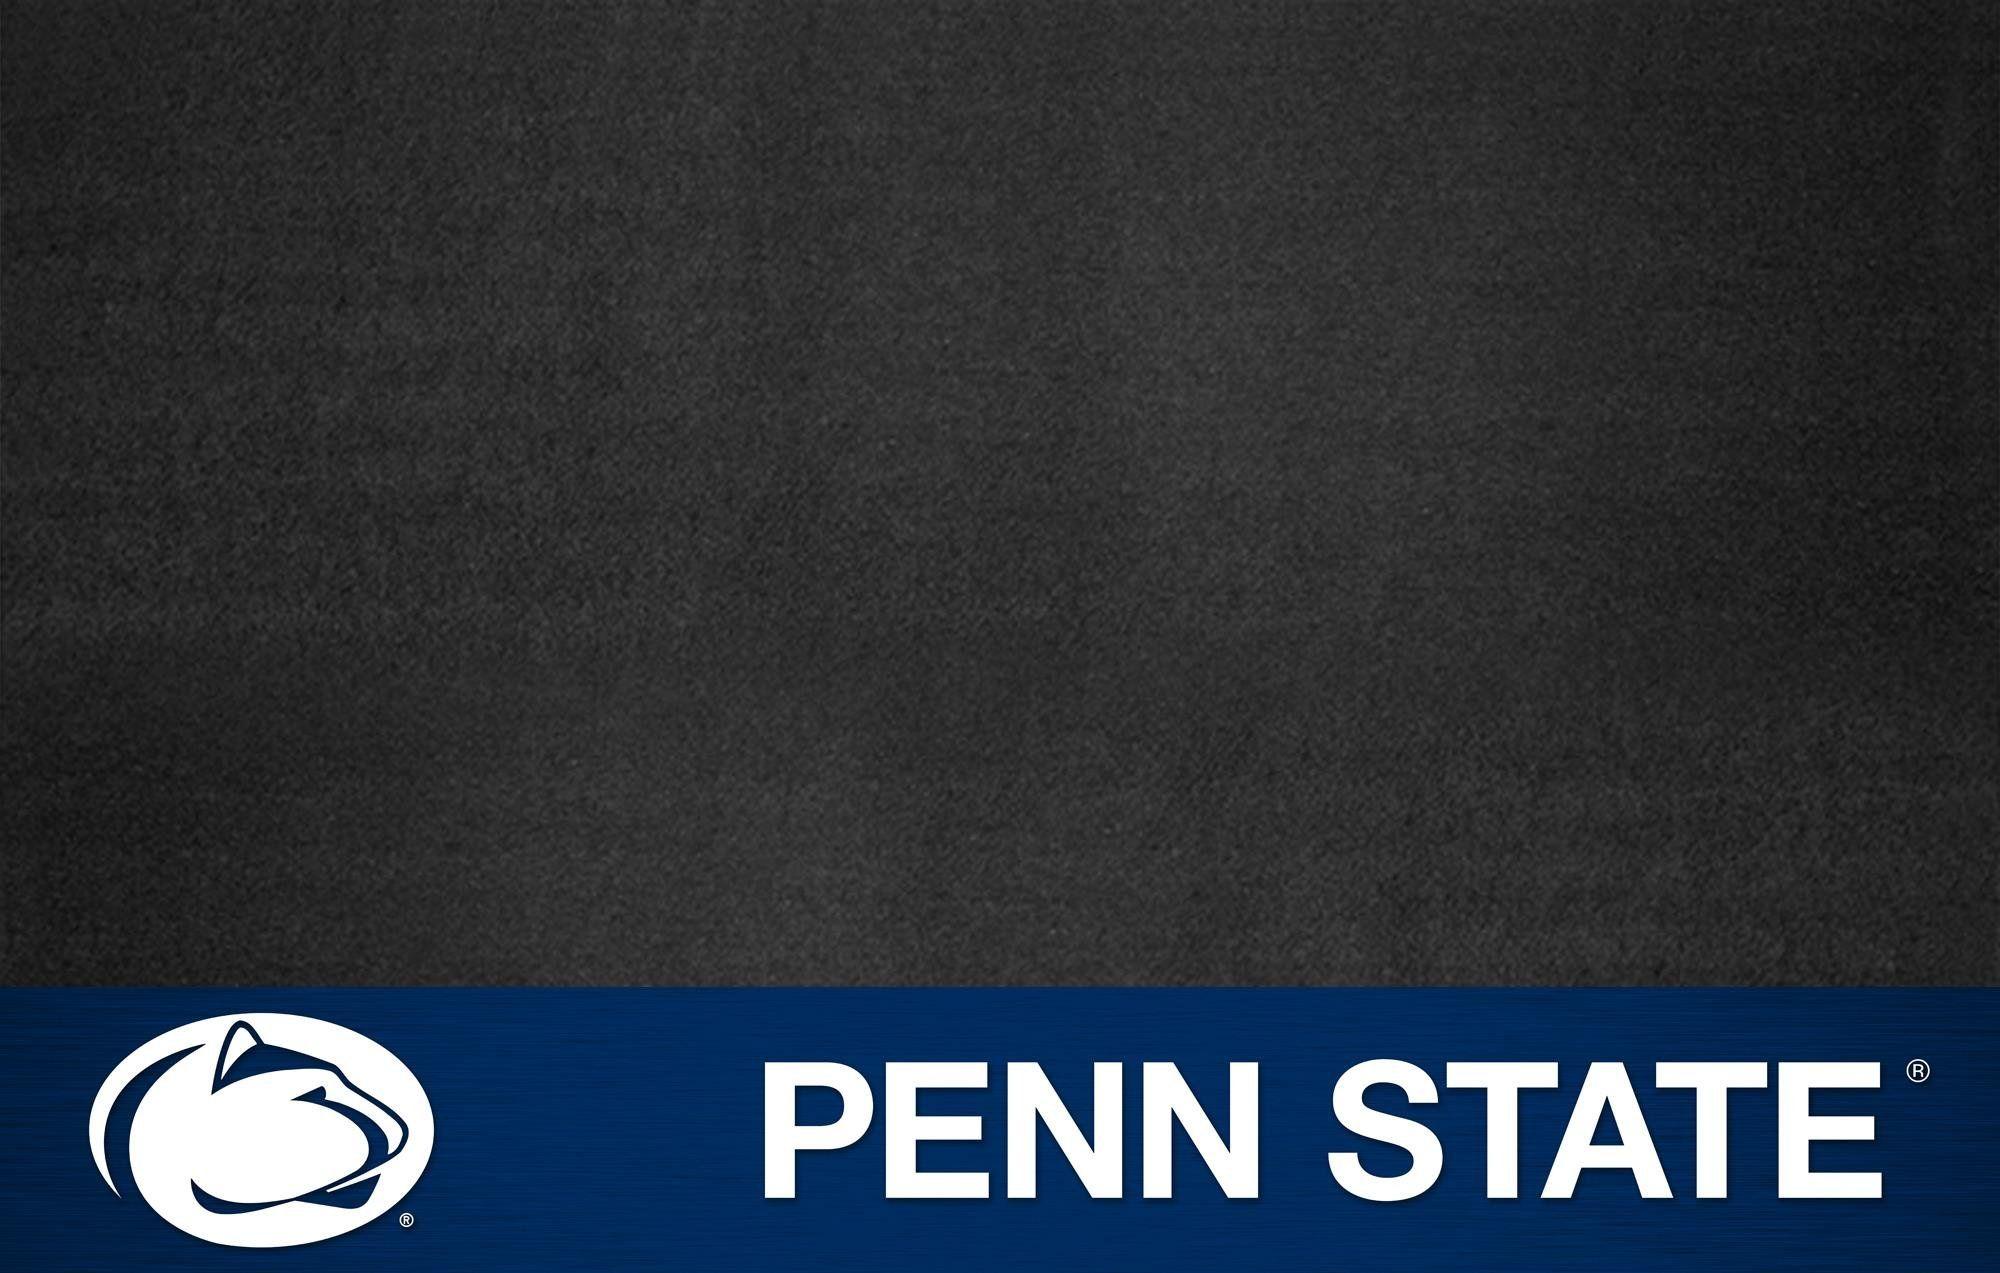 penn state nittany lions wallpapers wallpaper cave penn state nittany lions wallpapers